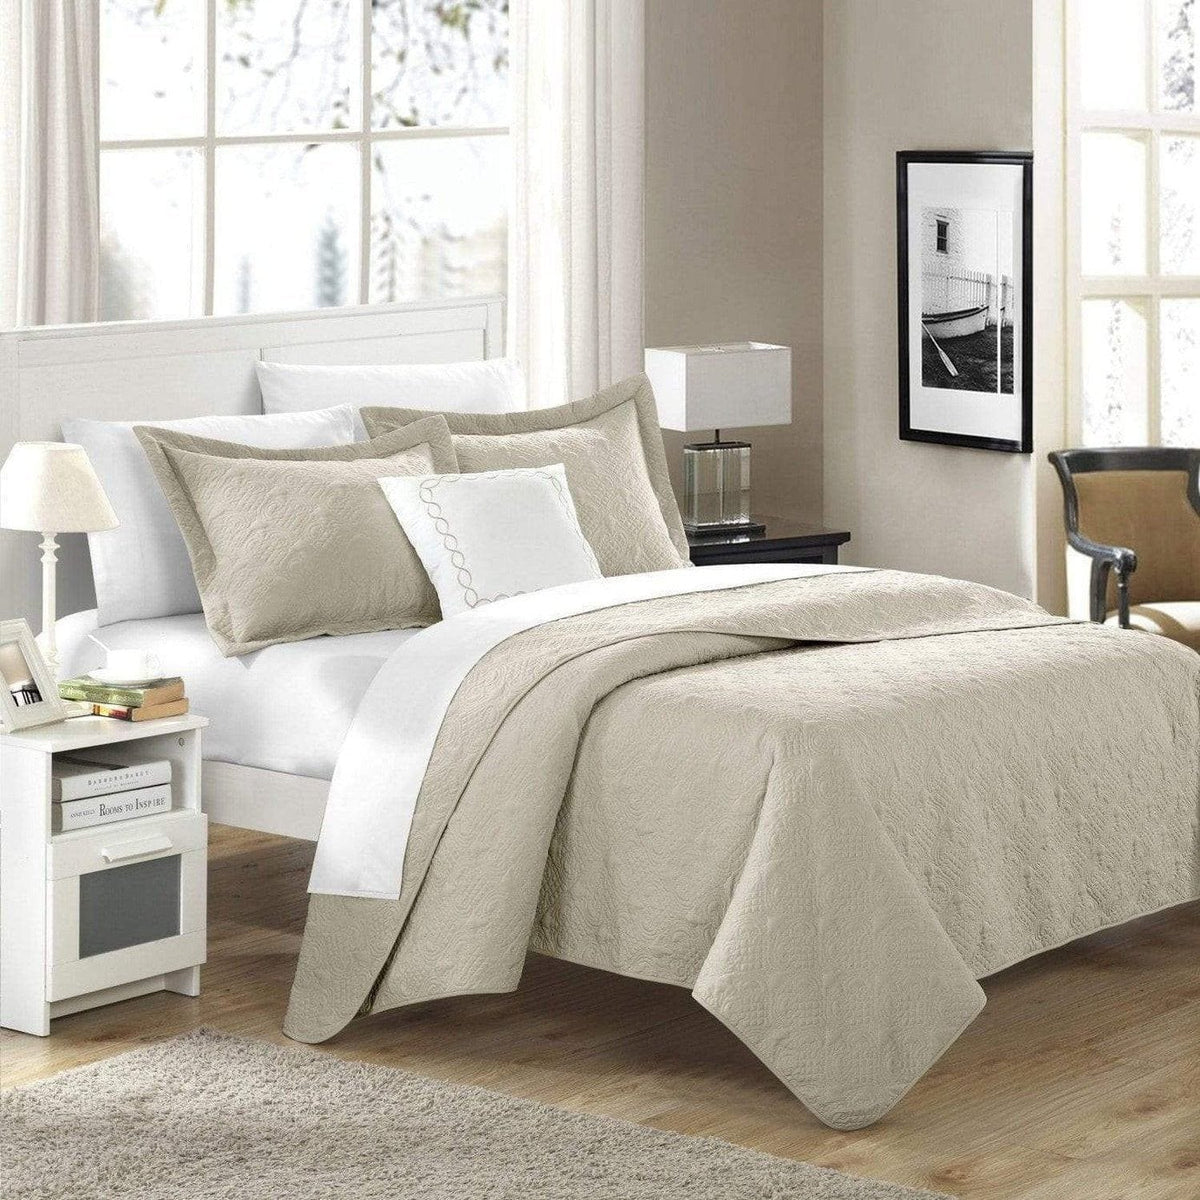 Chic Home Barcelo 8 Piece Matelasse Quilt Set Taupe